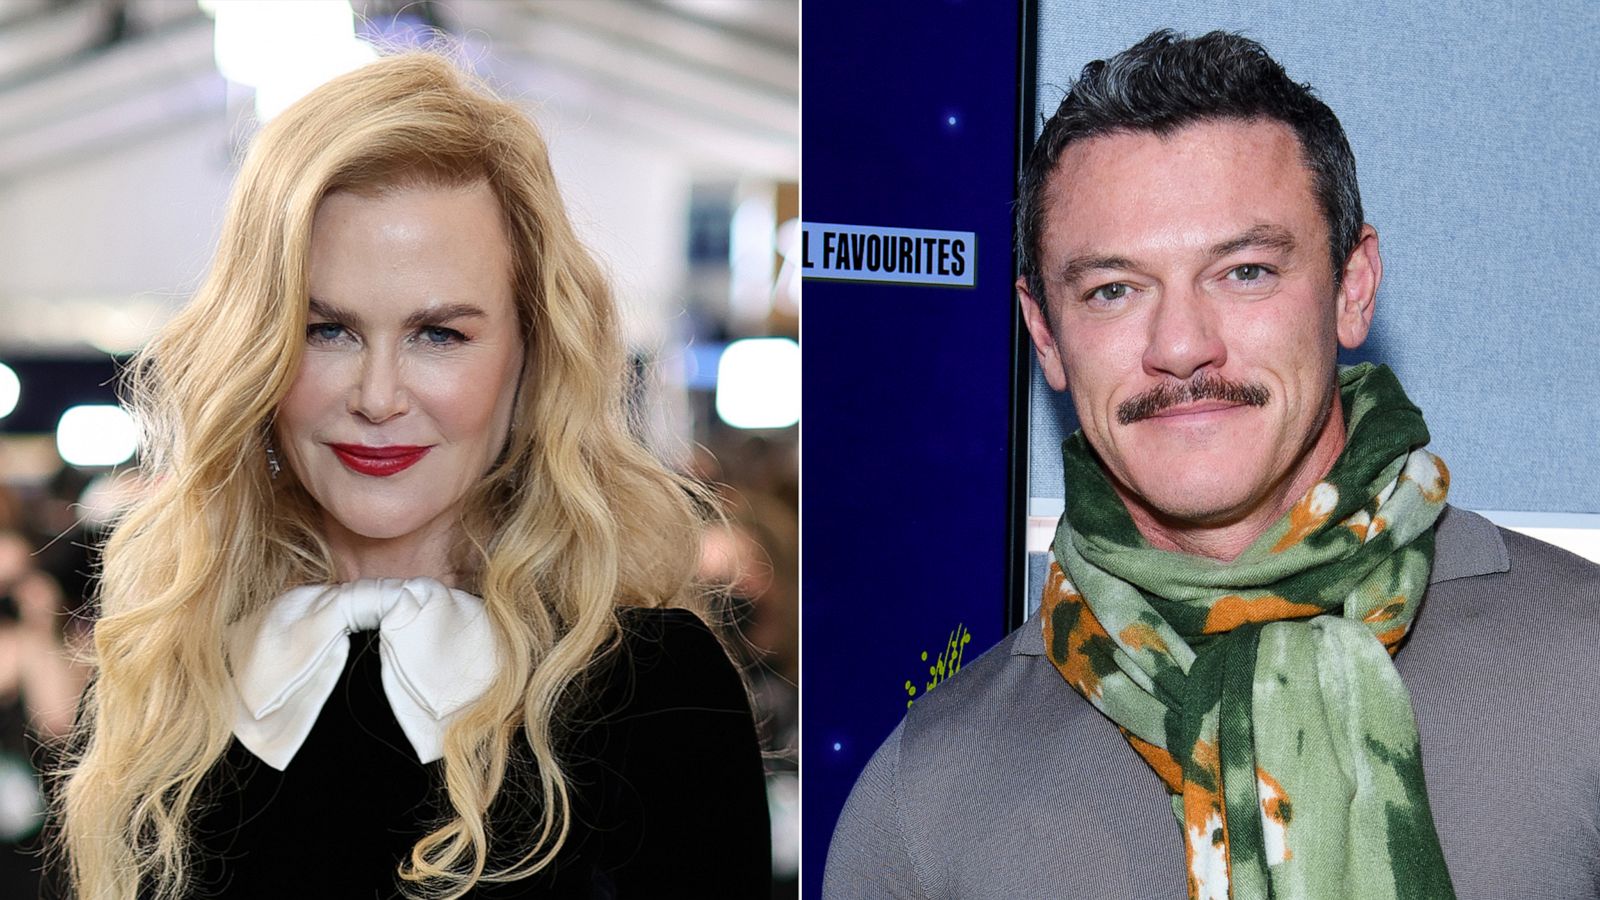 PHOTO: In this Feb. 27, 2022, file photo, Nicole Kidman attends an event in Santa Monica, Calif. | Luke Evans attends an event in London on Oct. 21, 2022.